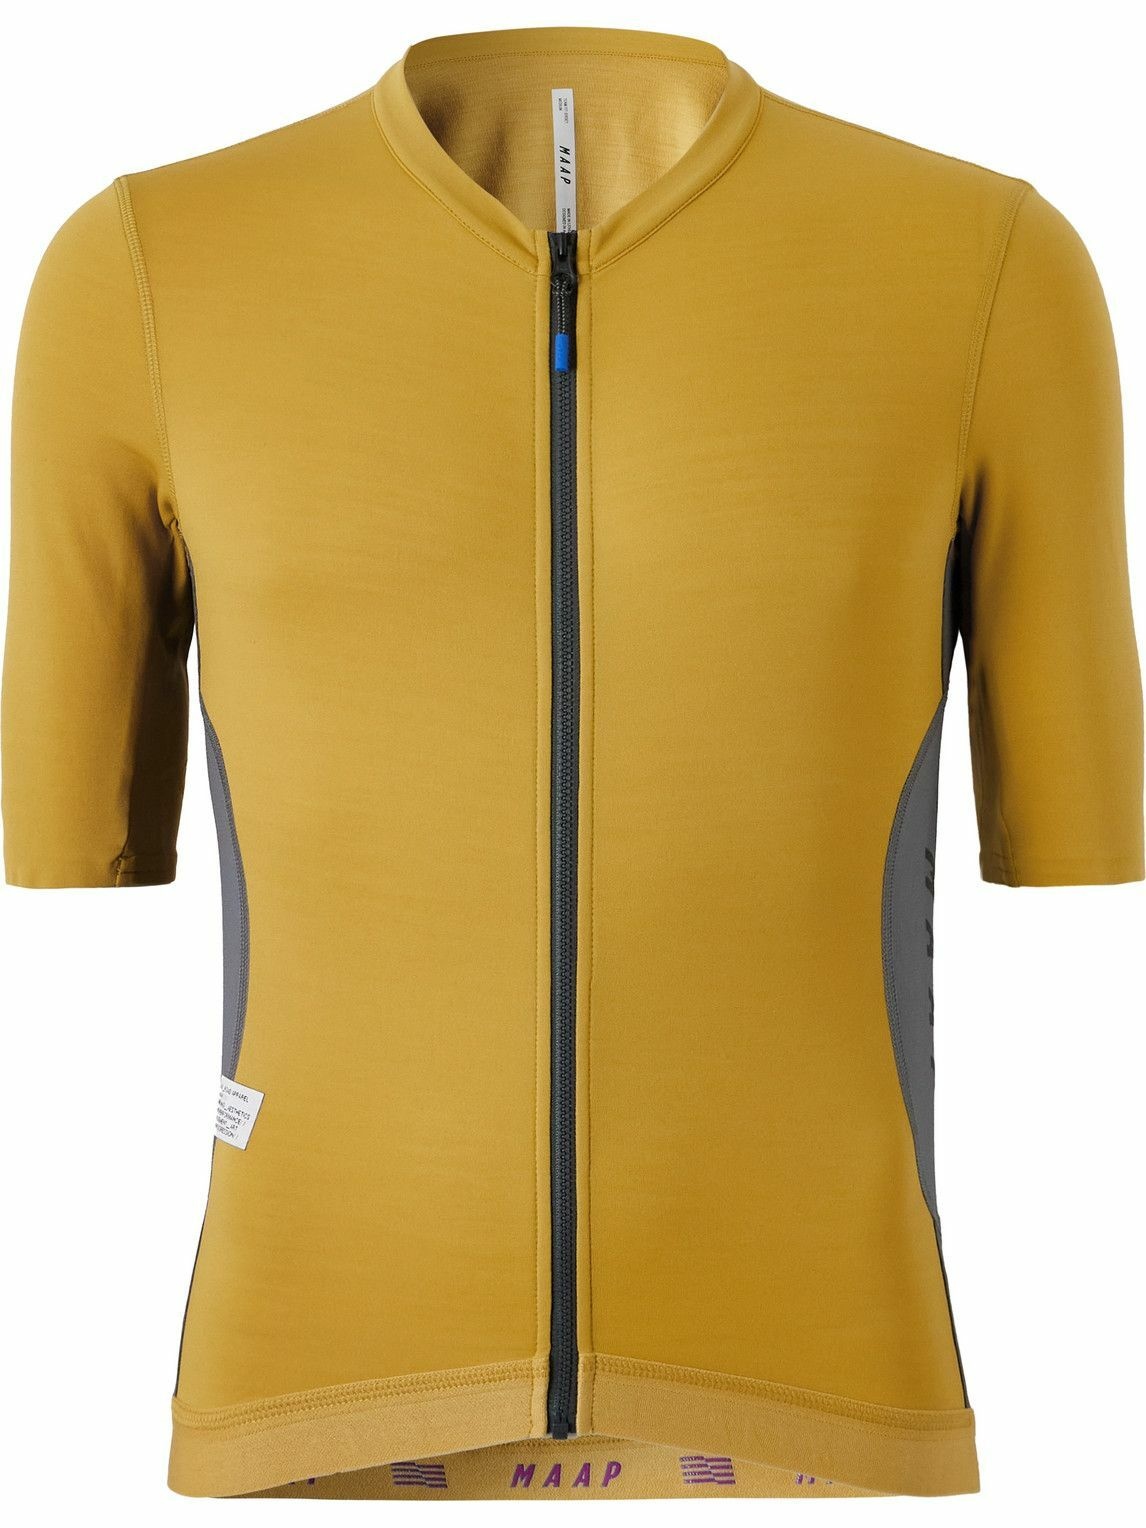 MAAP - Alt_Road Ripstop-Panelled Cycling Jersey - Gold MAAP